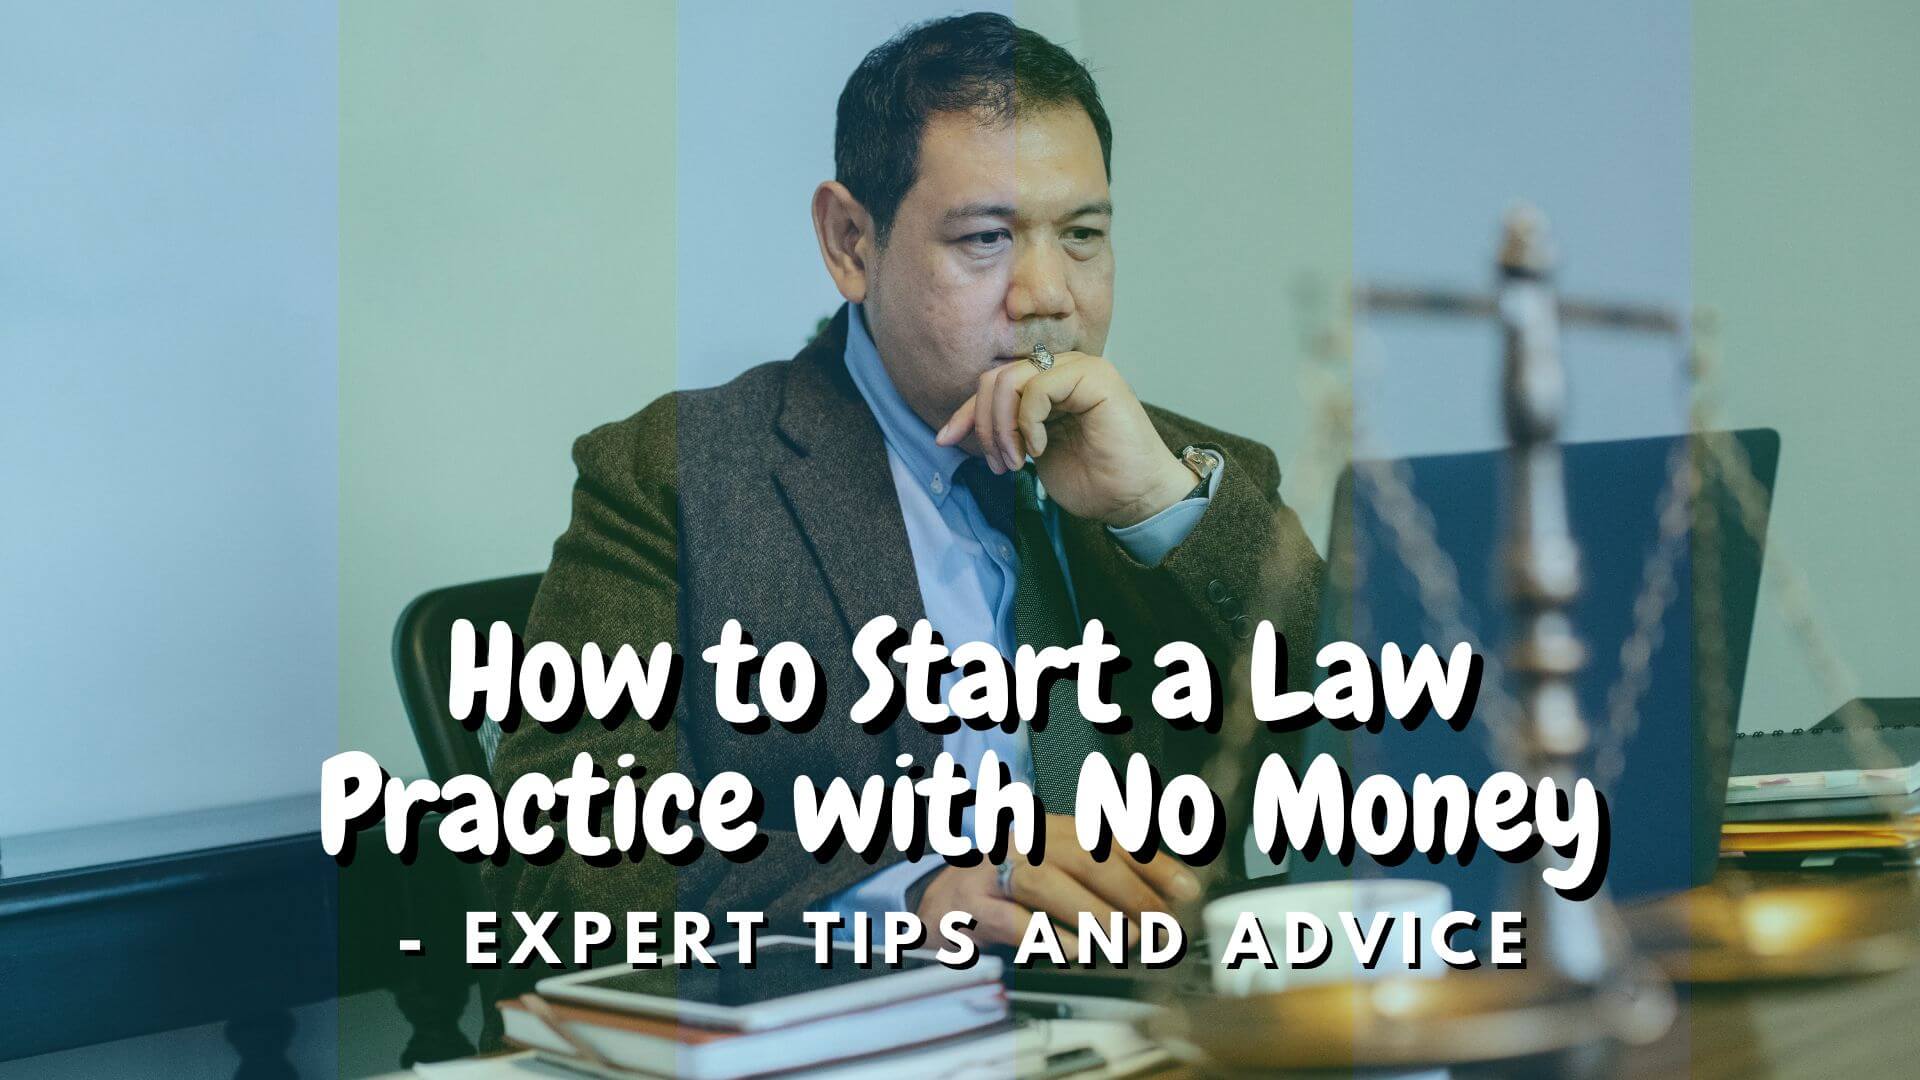 How to start a law practice with no money? Here are some tips on getting started and growing your new law practice on a limited budget.